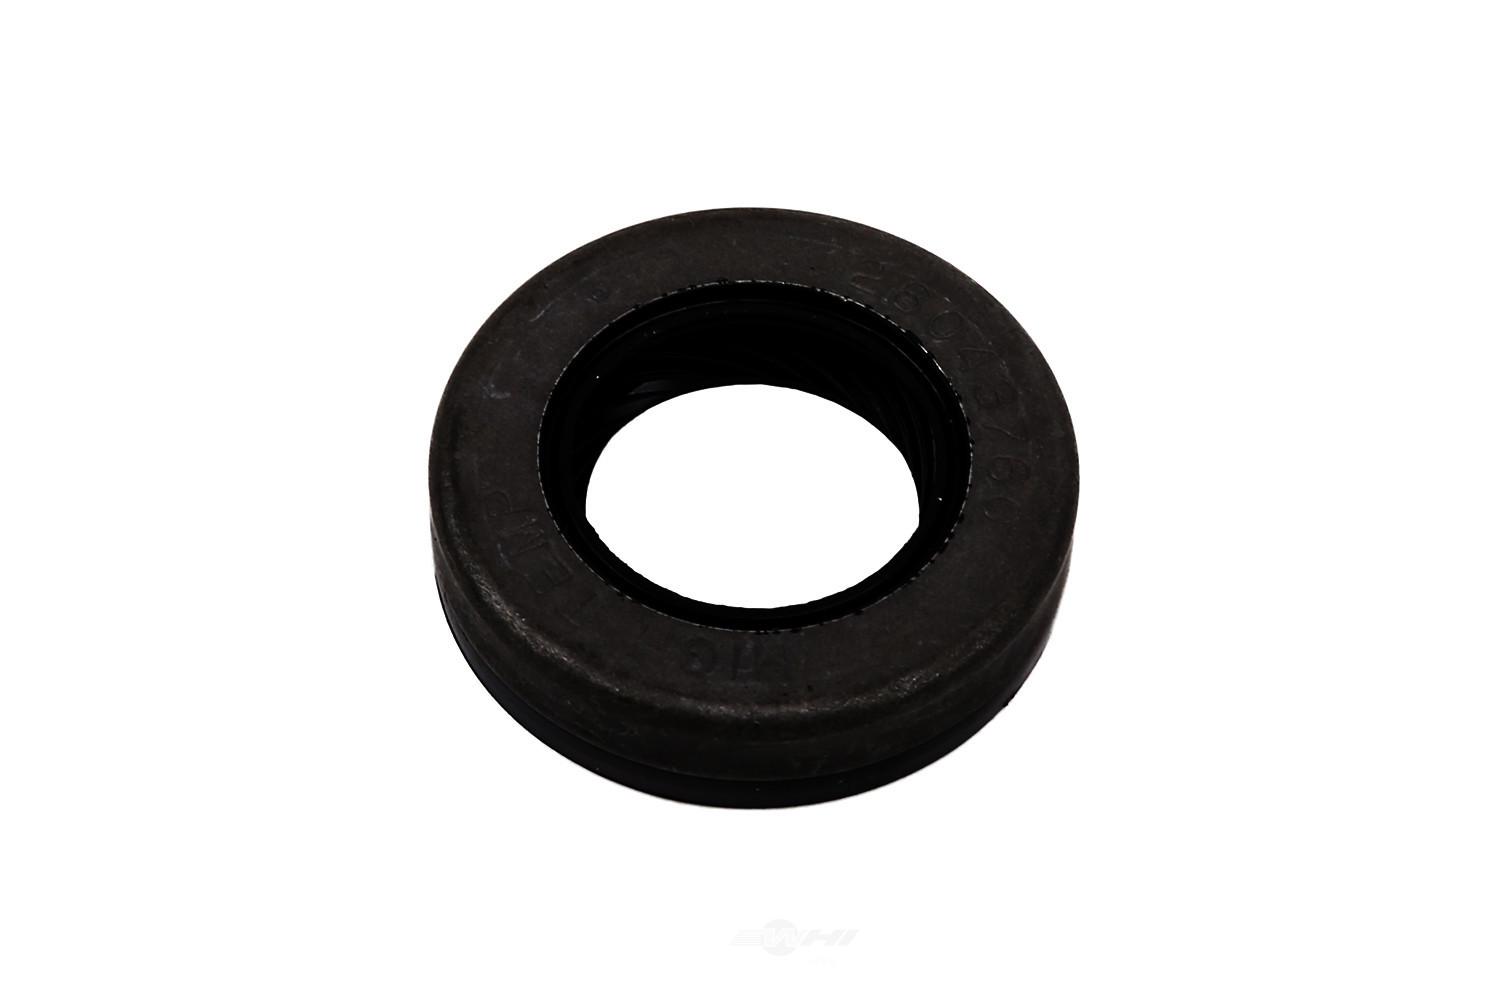 GM GENUINE PARTS - Power Steering Pump Shaft Seal - GMP 15277770